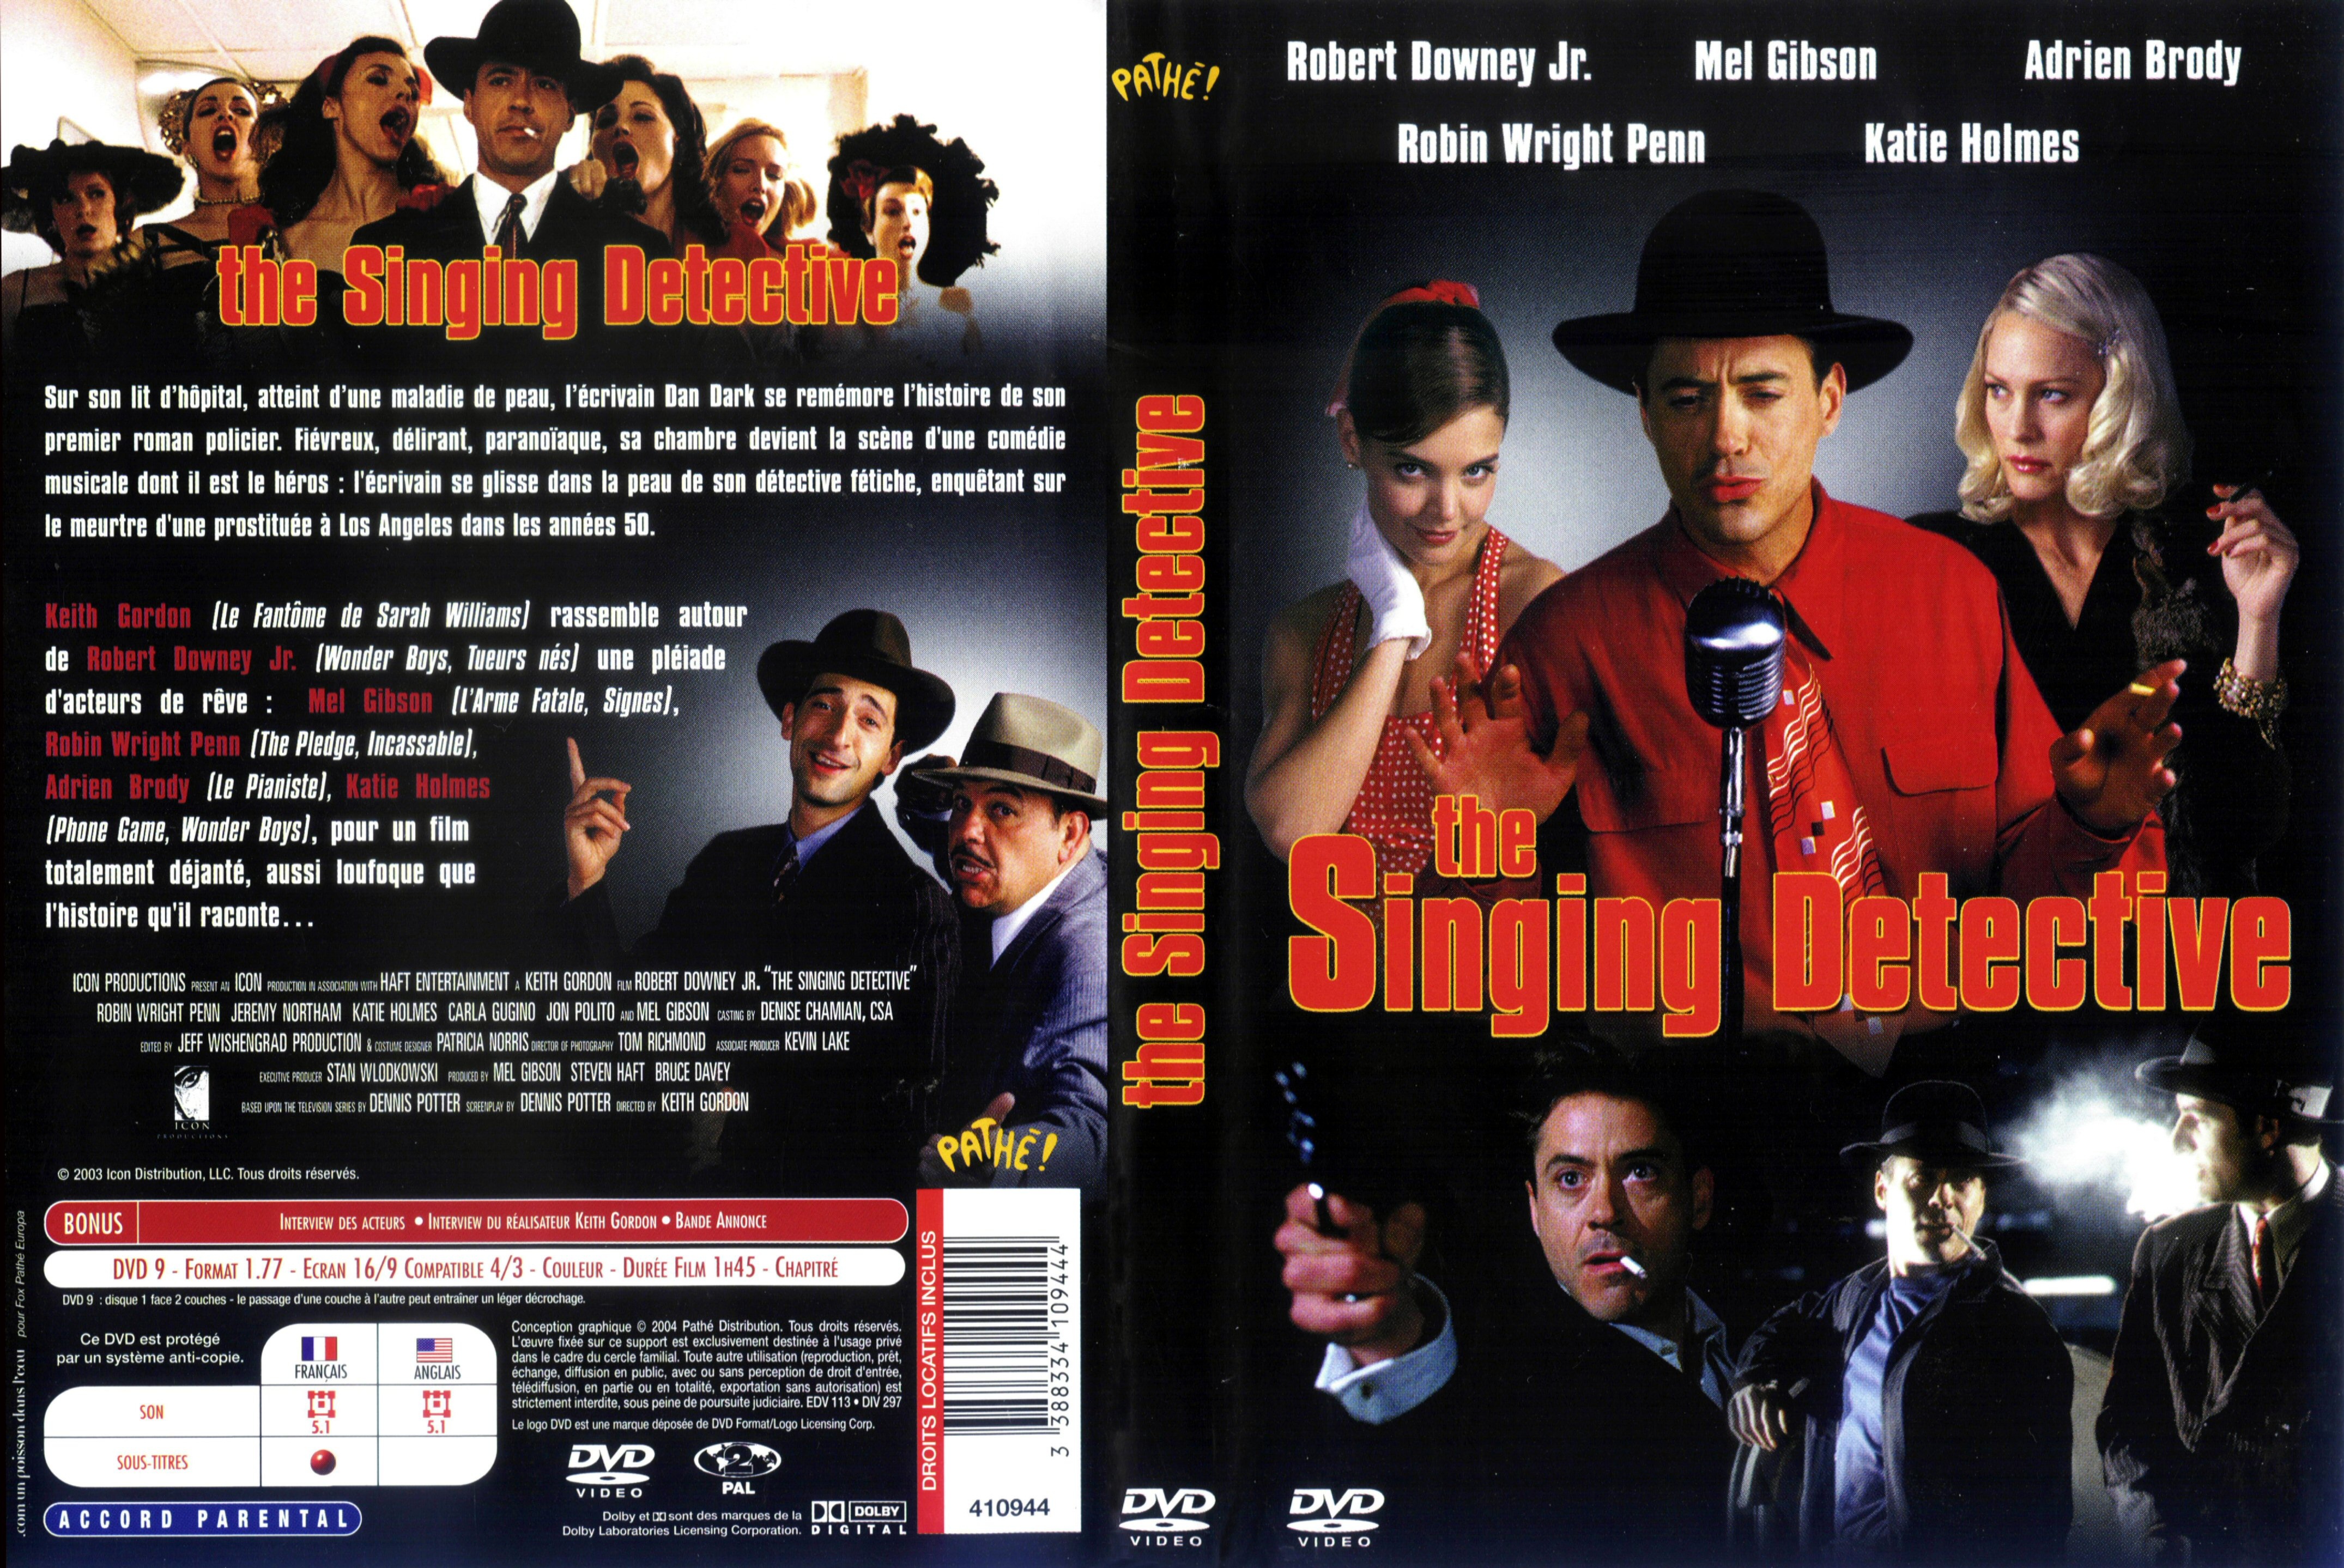 Jaquette DVD The singing detective